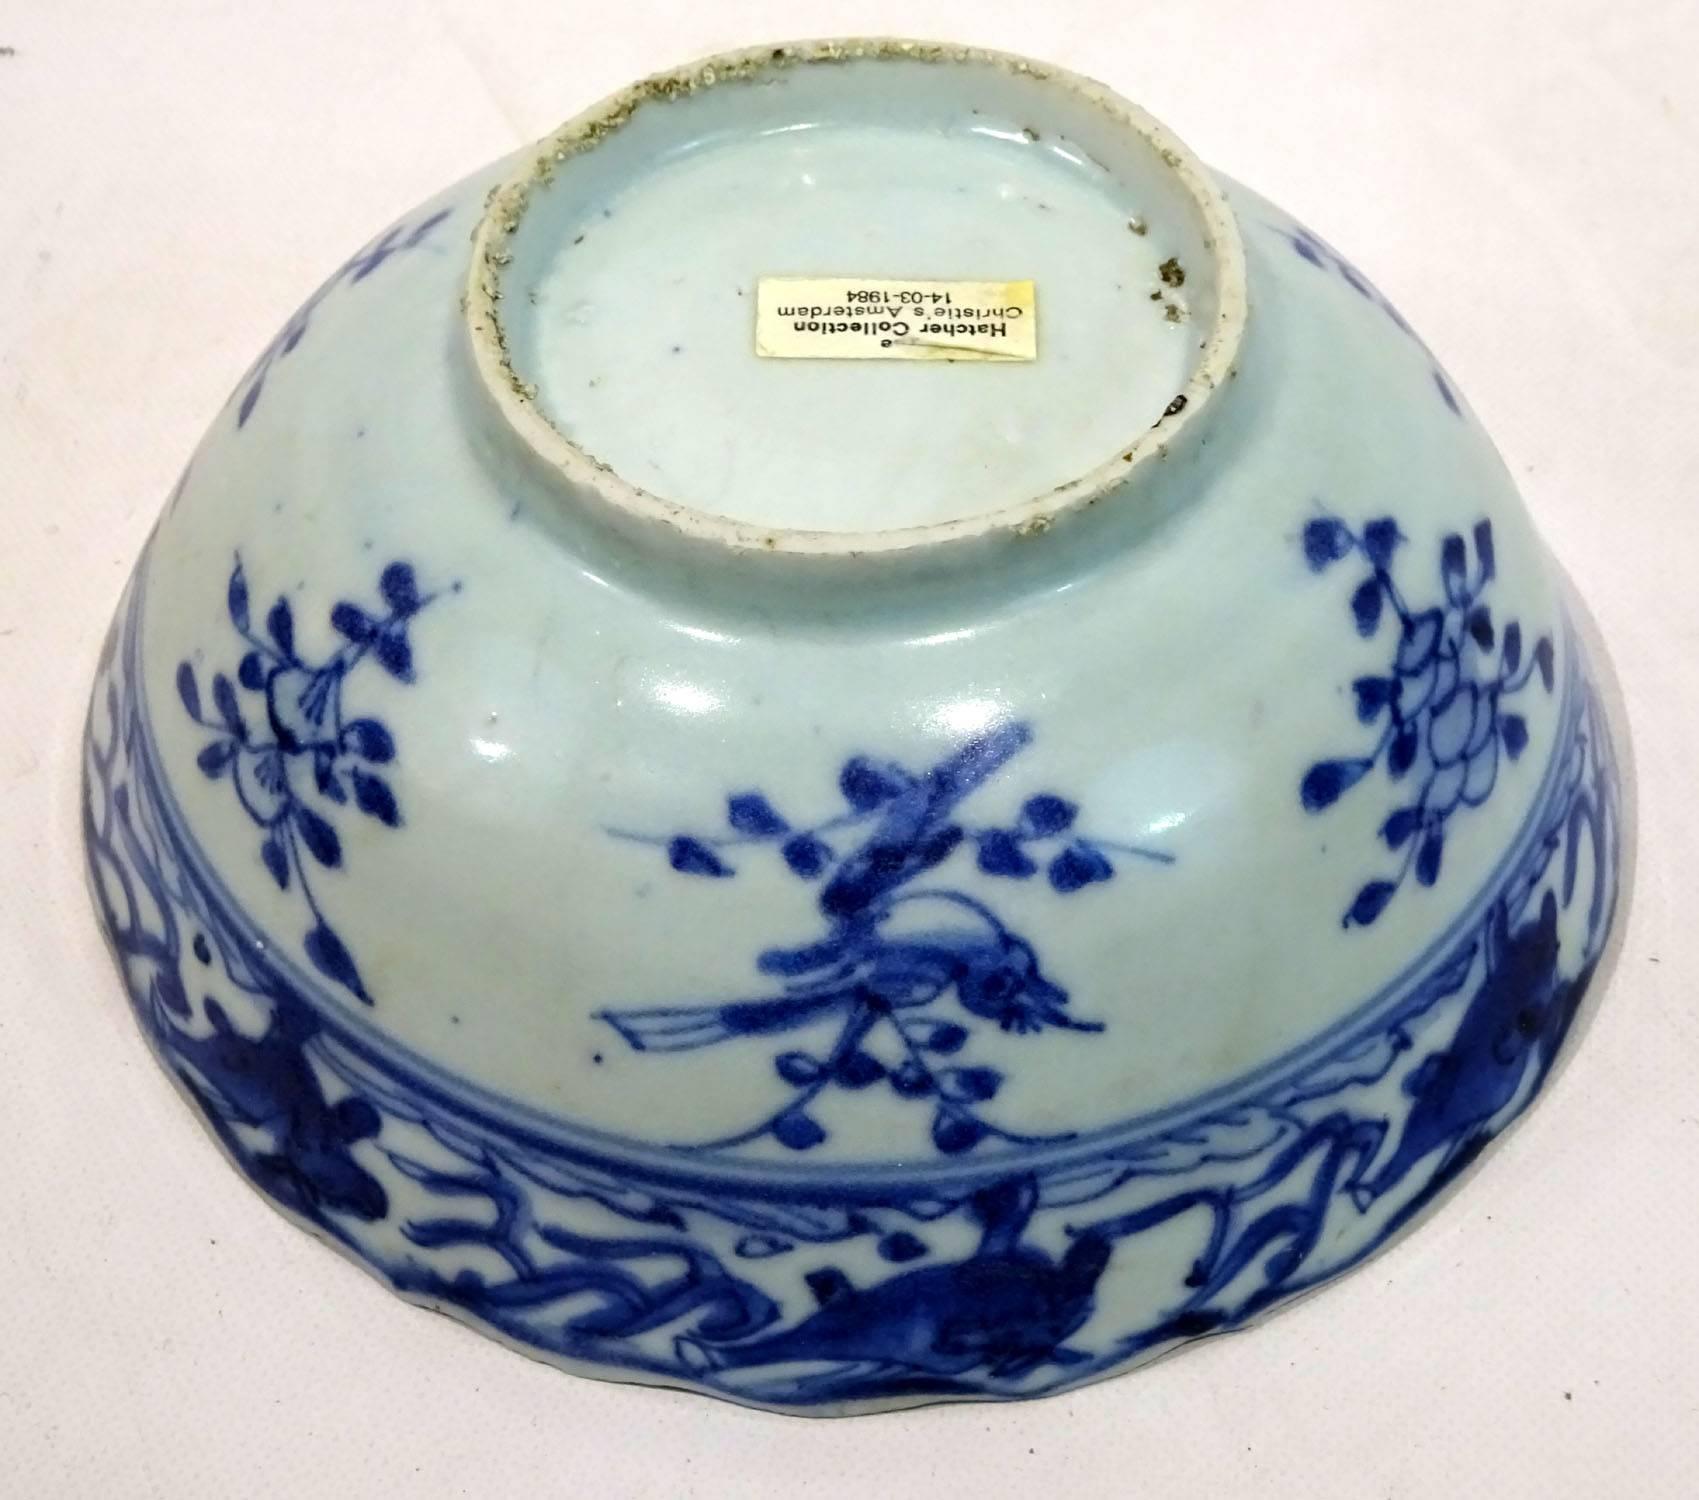 17th Century Chinese Blue and White Porcelain Bowl from The Hatcher Collection 3